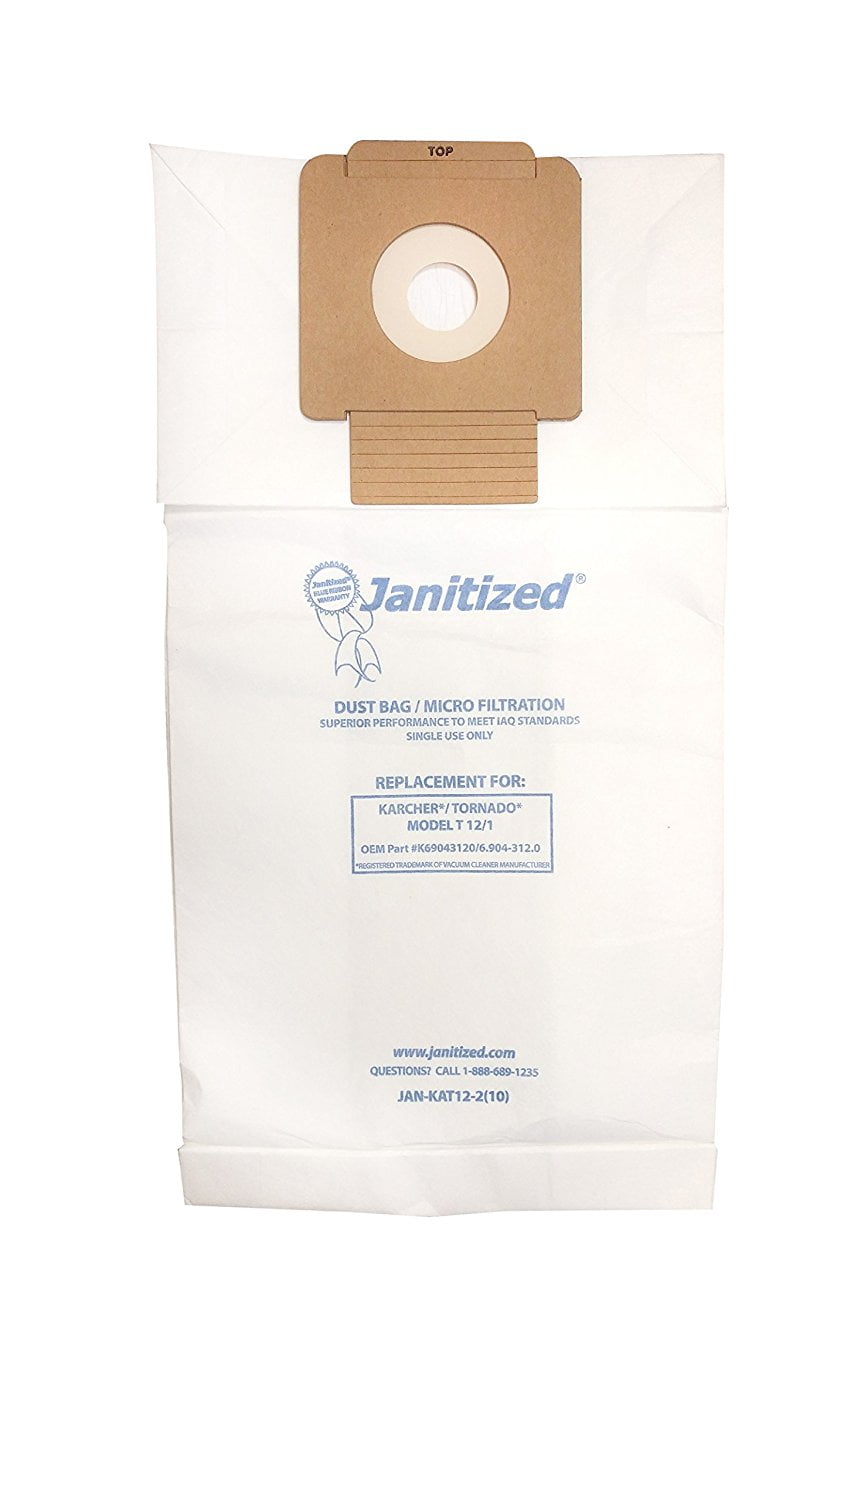 BAGS # 213842 3 pack 820 GENUINE Dust Bags  for Zing Bagged Canister Vacuums 